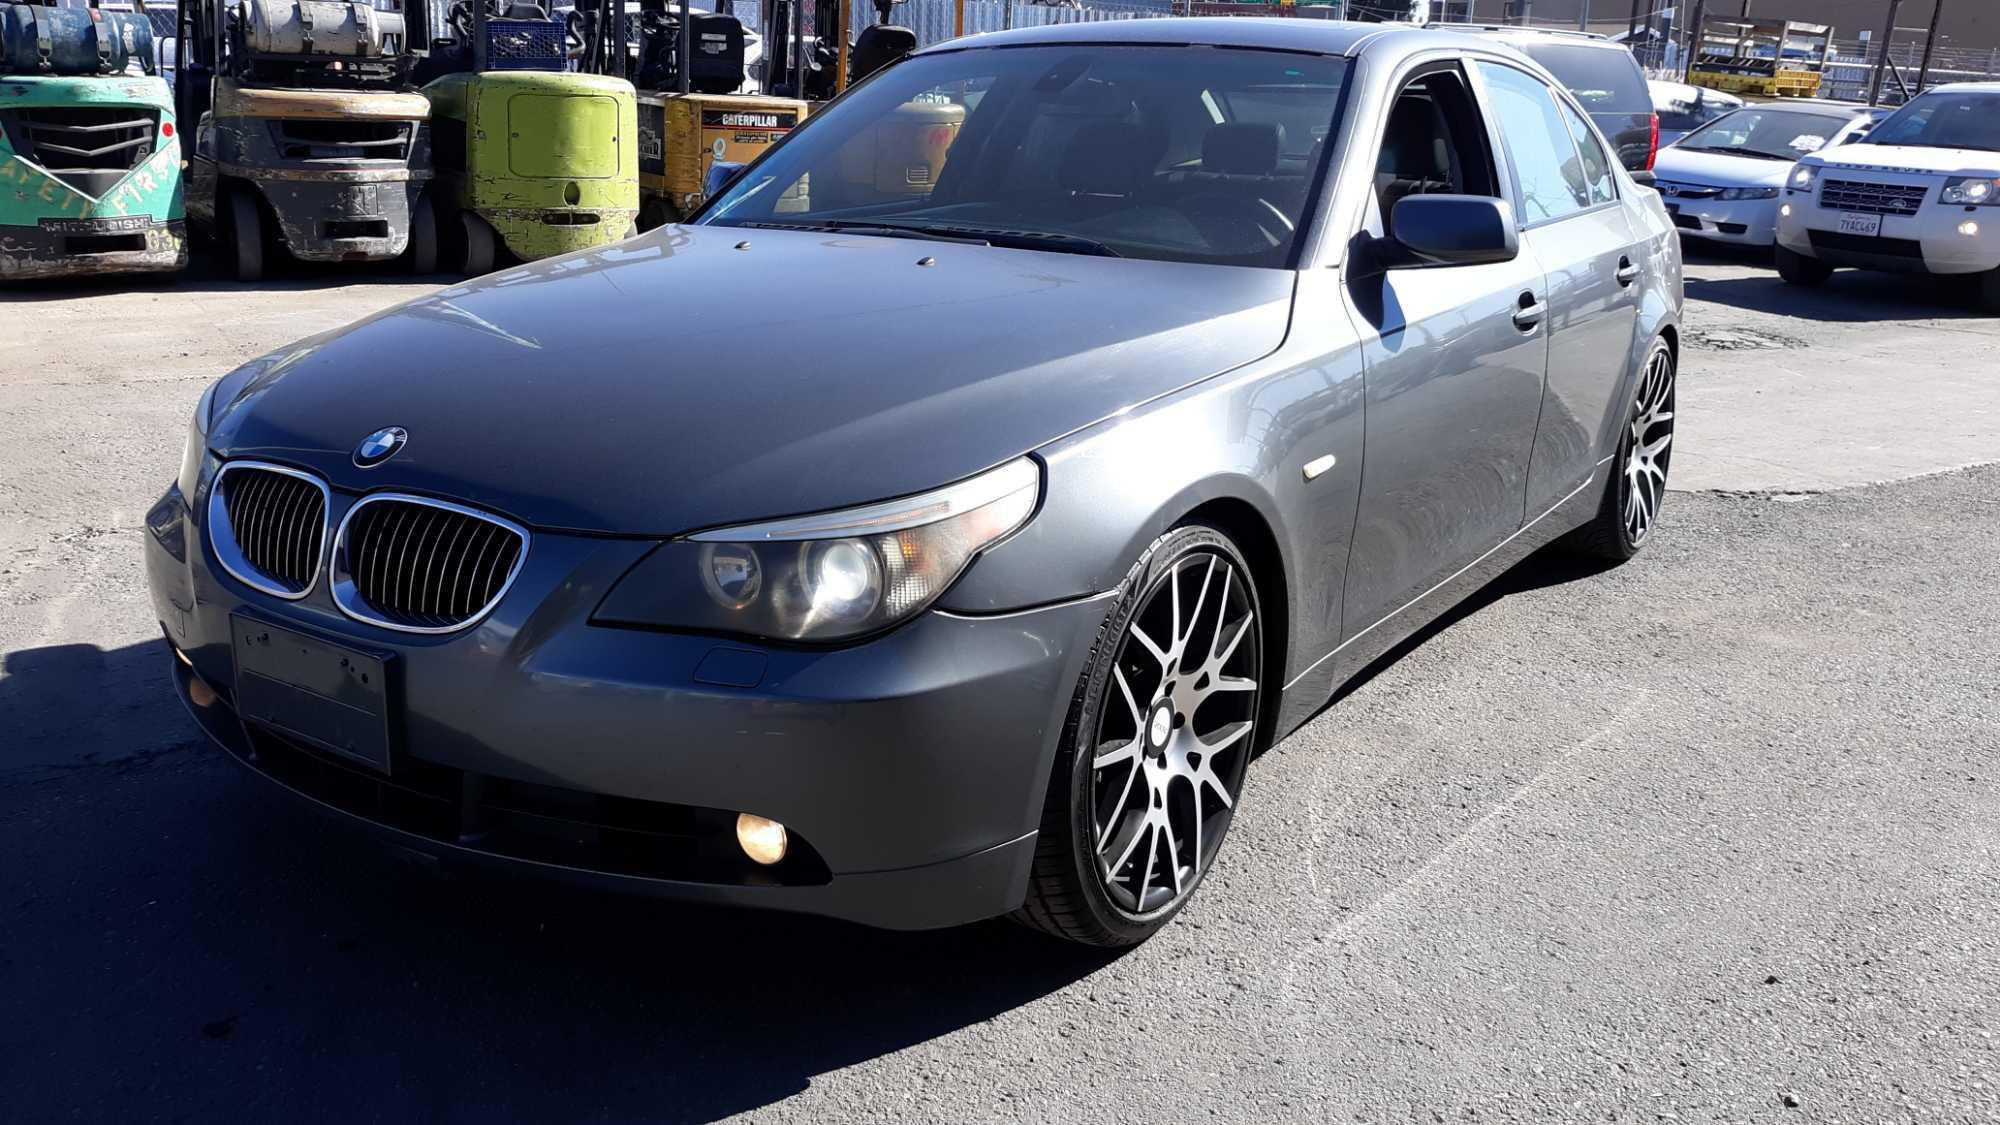 2006 BMW 530i***FOR DEALER/DISMANTLER/EXPORT ONLY***WAS DRIVEN TO FISCHER LOT***